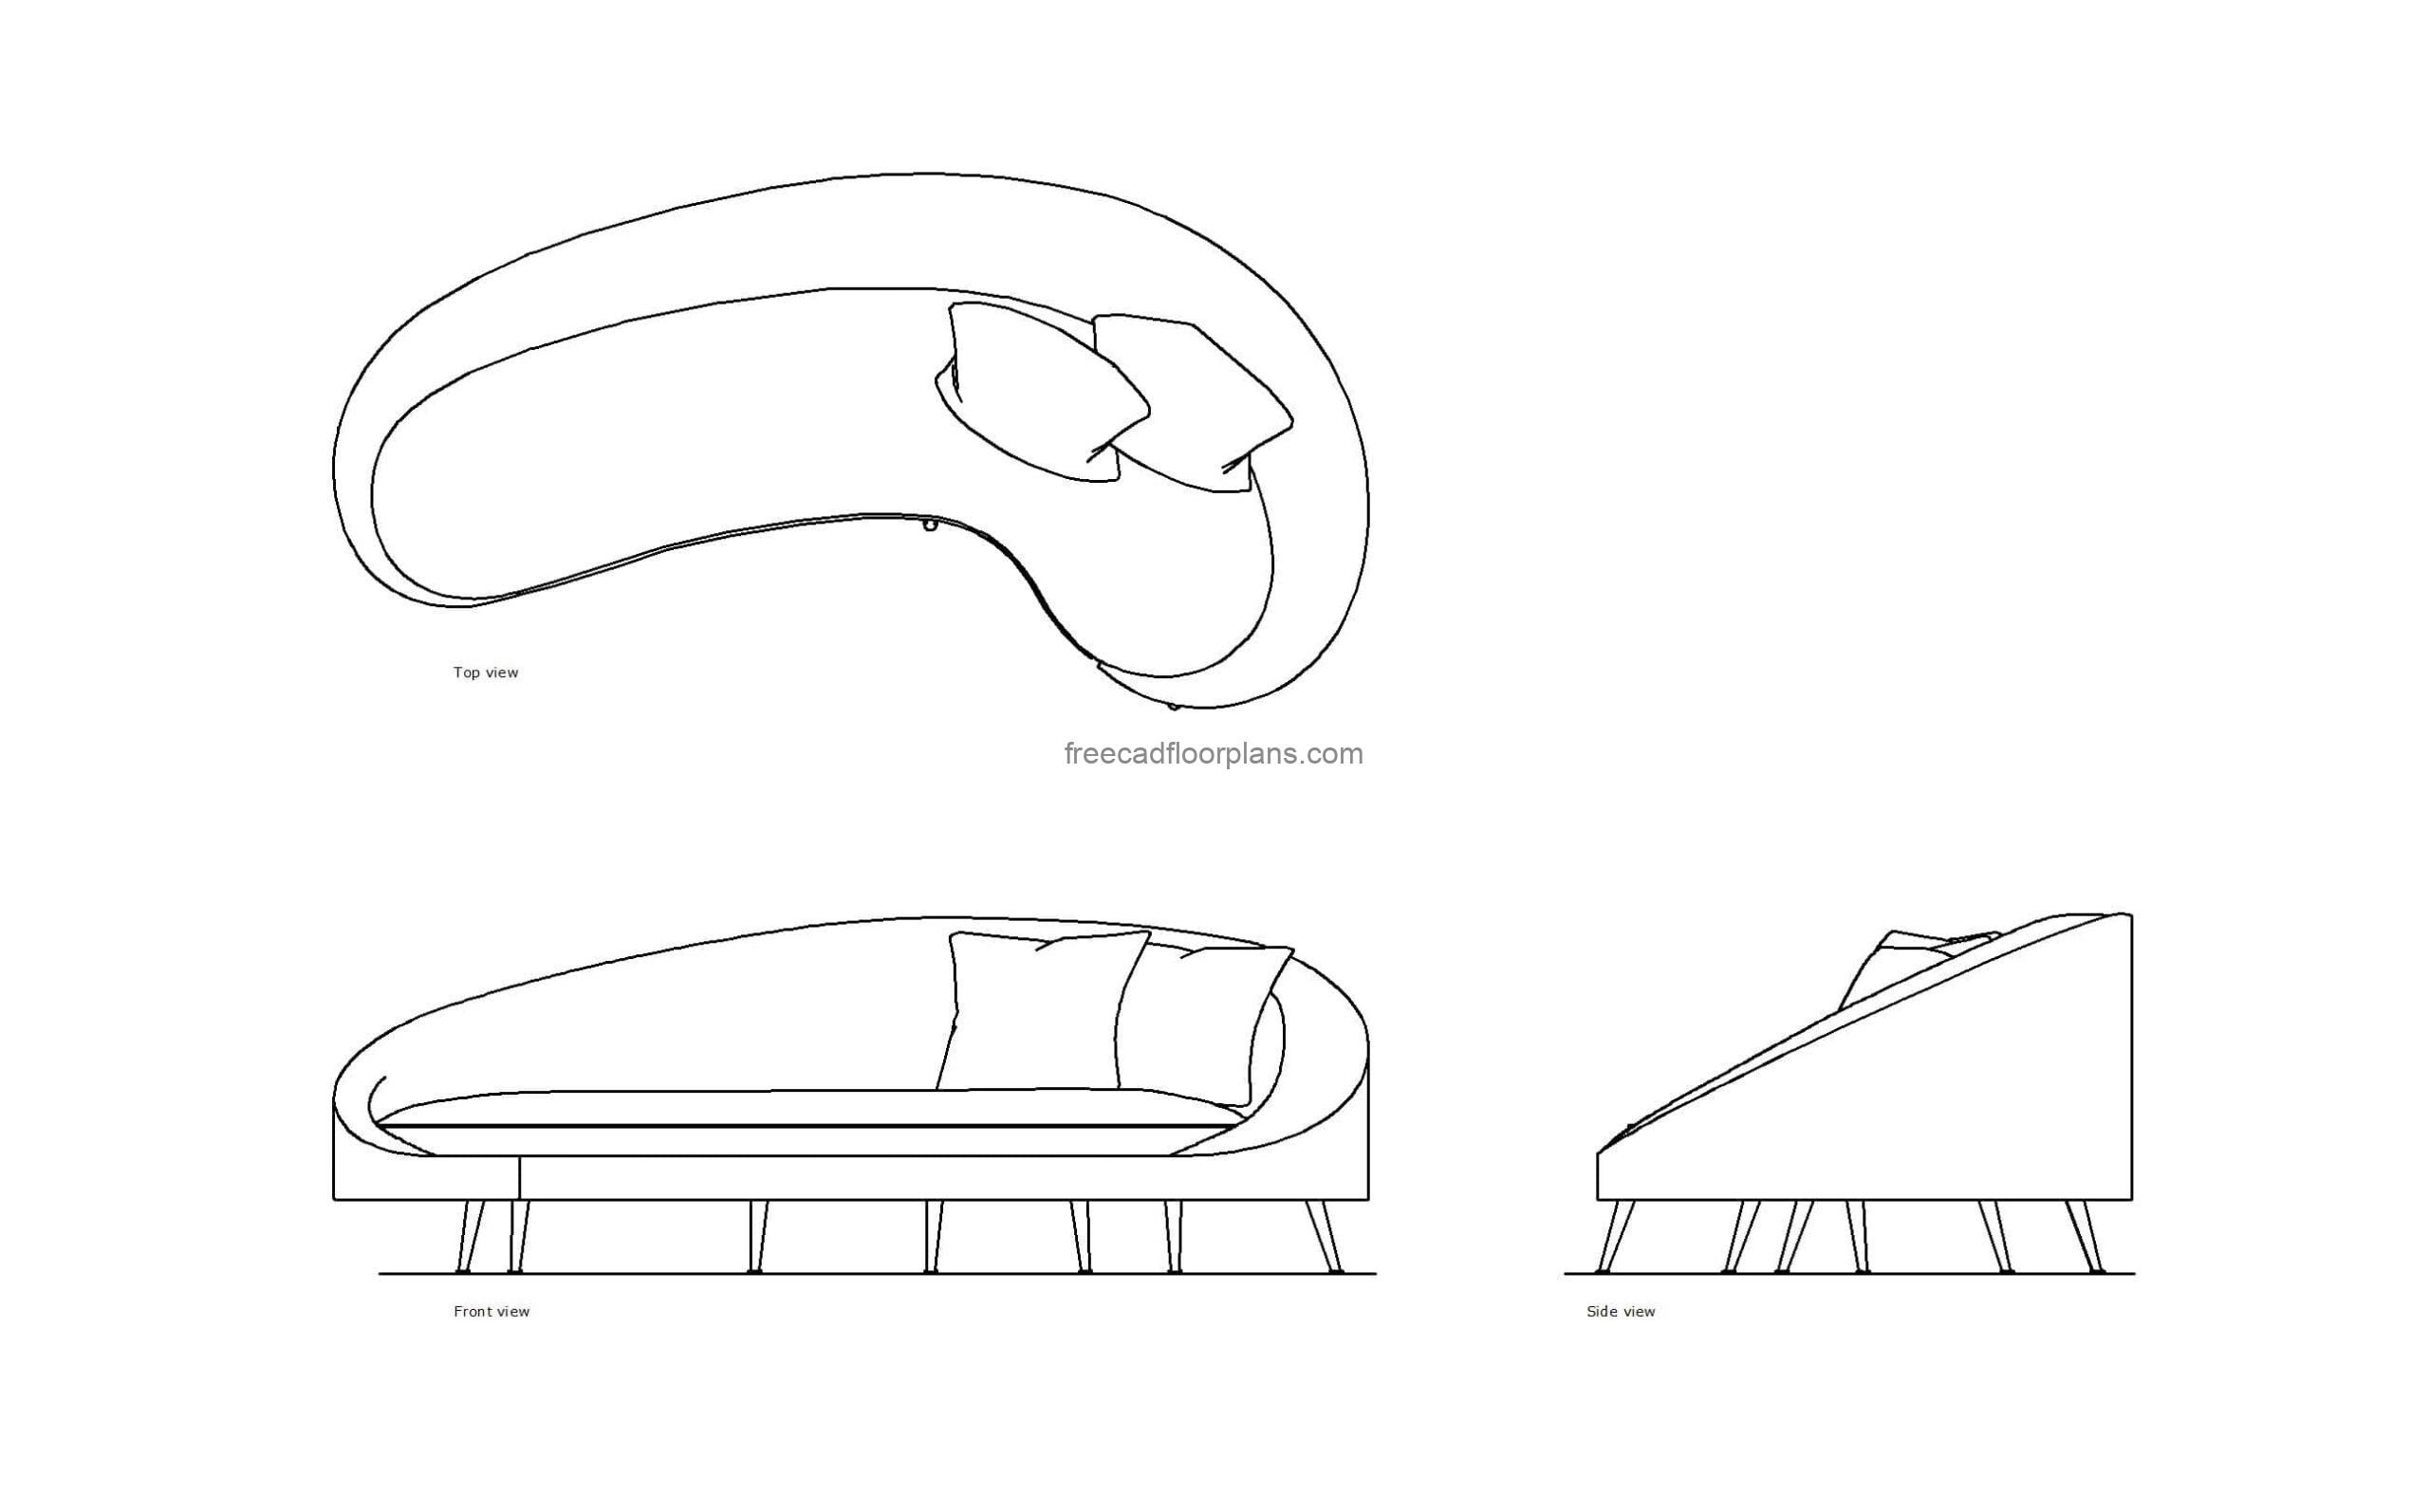 autocad drawing of a curved sofa, plan and elevation 2d views, dwg file free for download